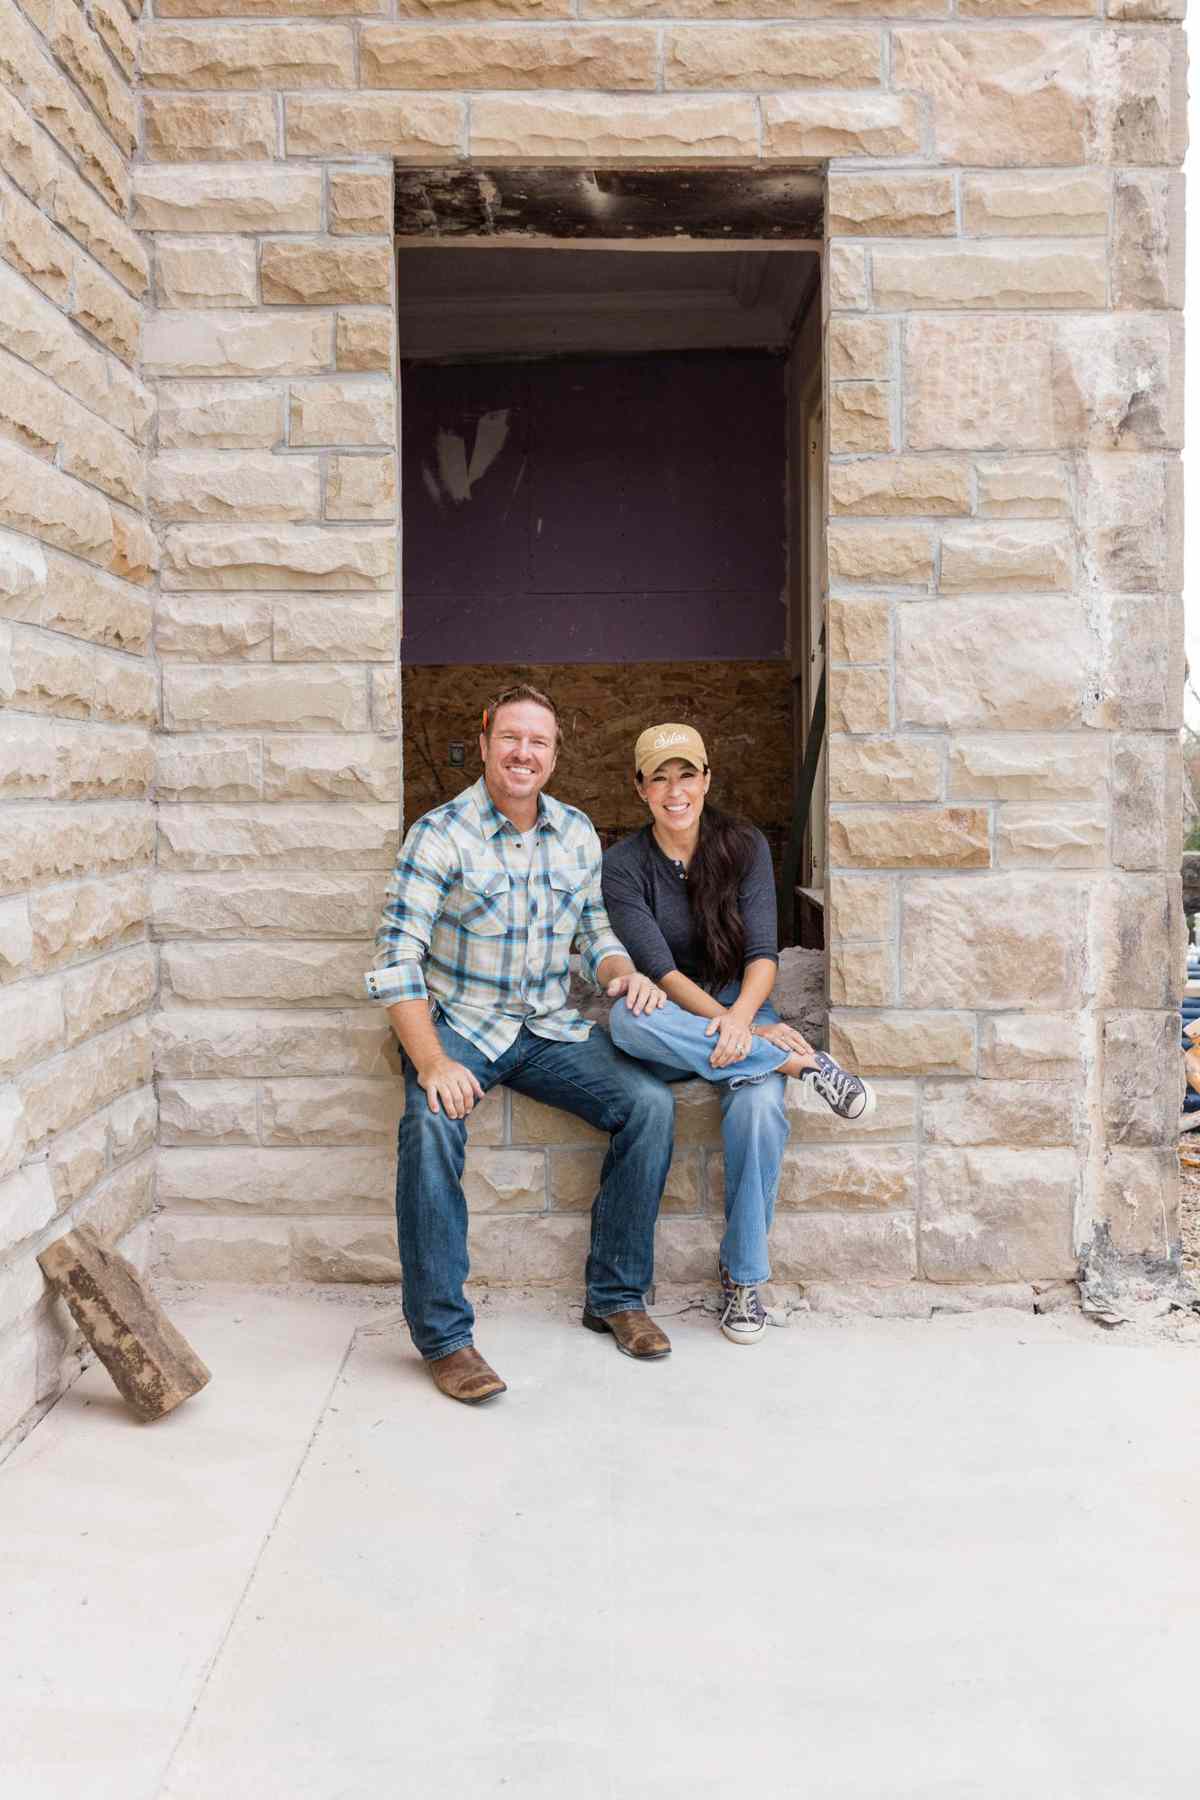 Hosts Chip and Joanna Gaines, as seen on Fixer Upper: The Castle.